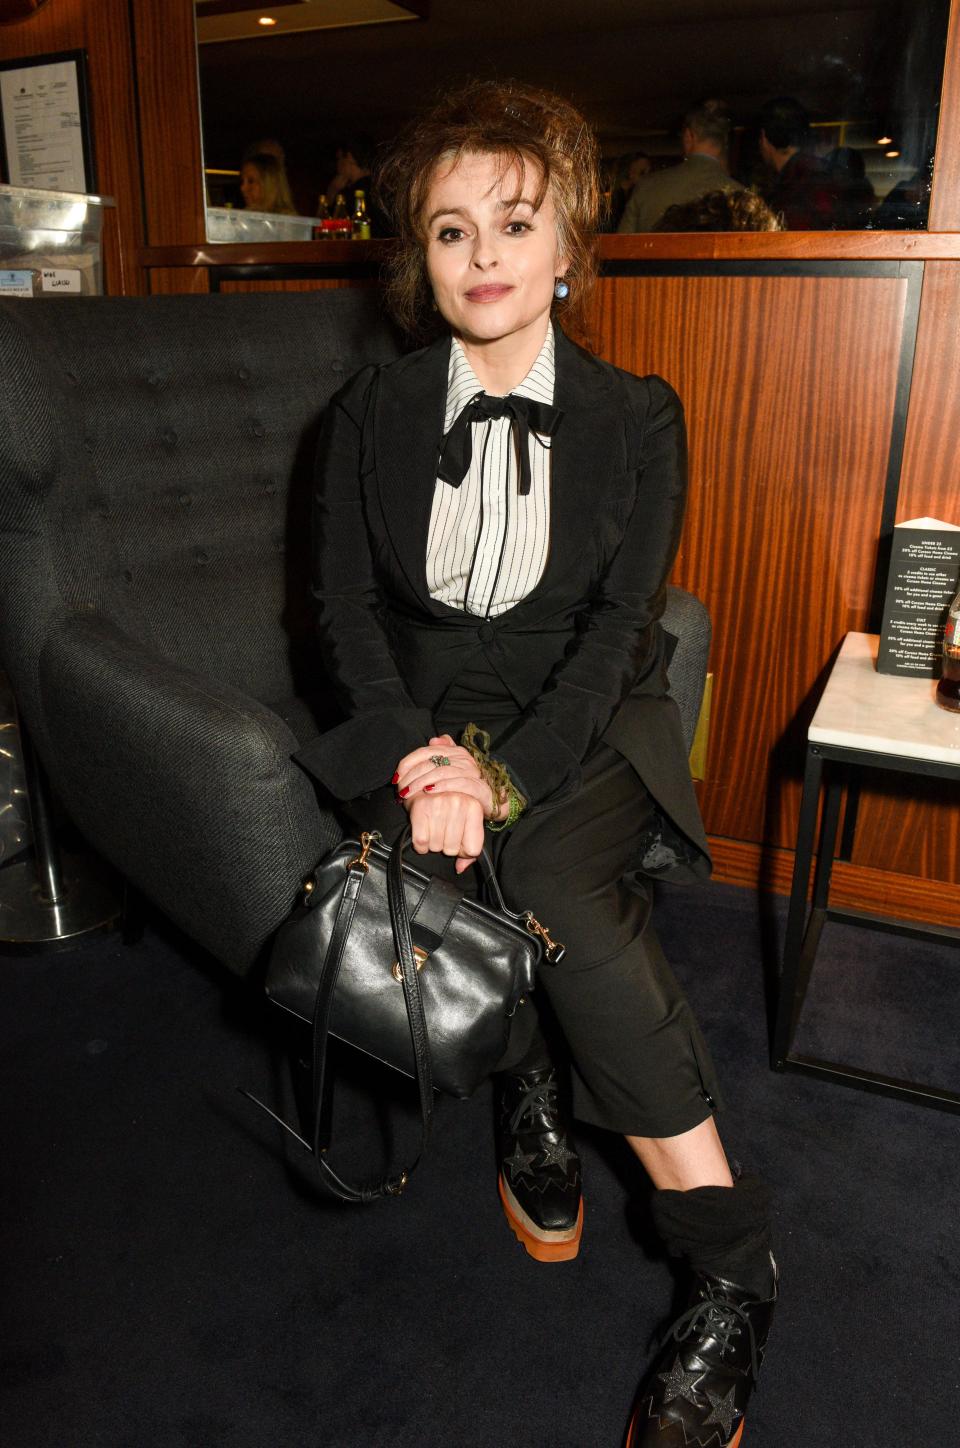 Helena Bonham Carter decried "cancel culture" in an interview with The Times.